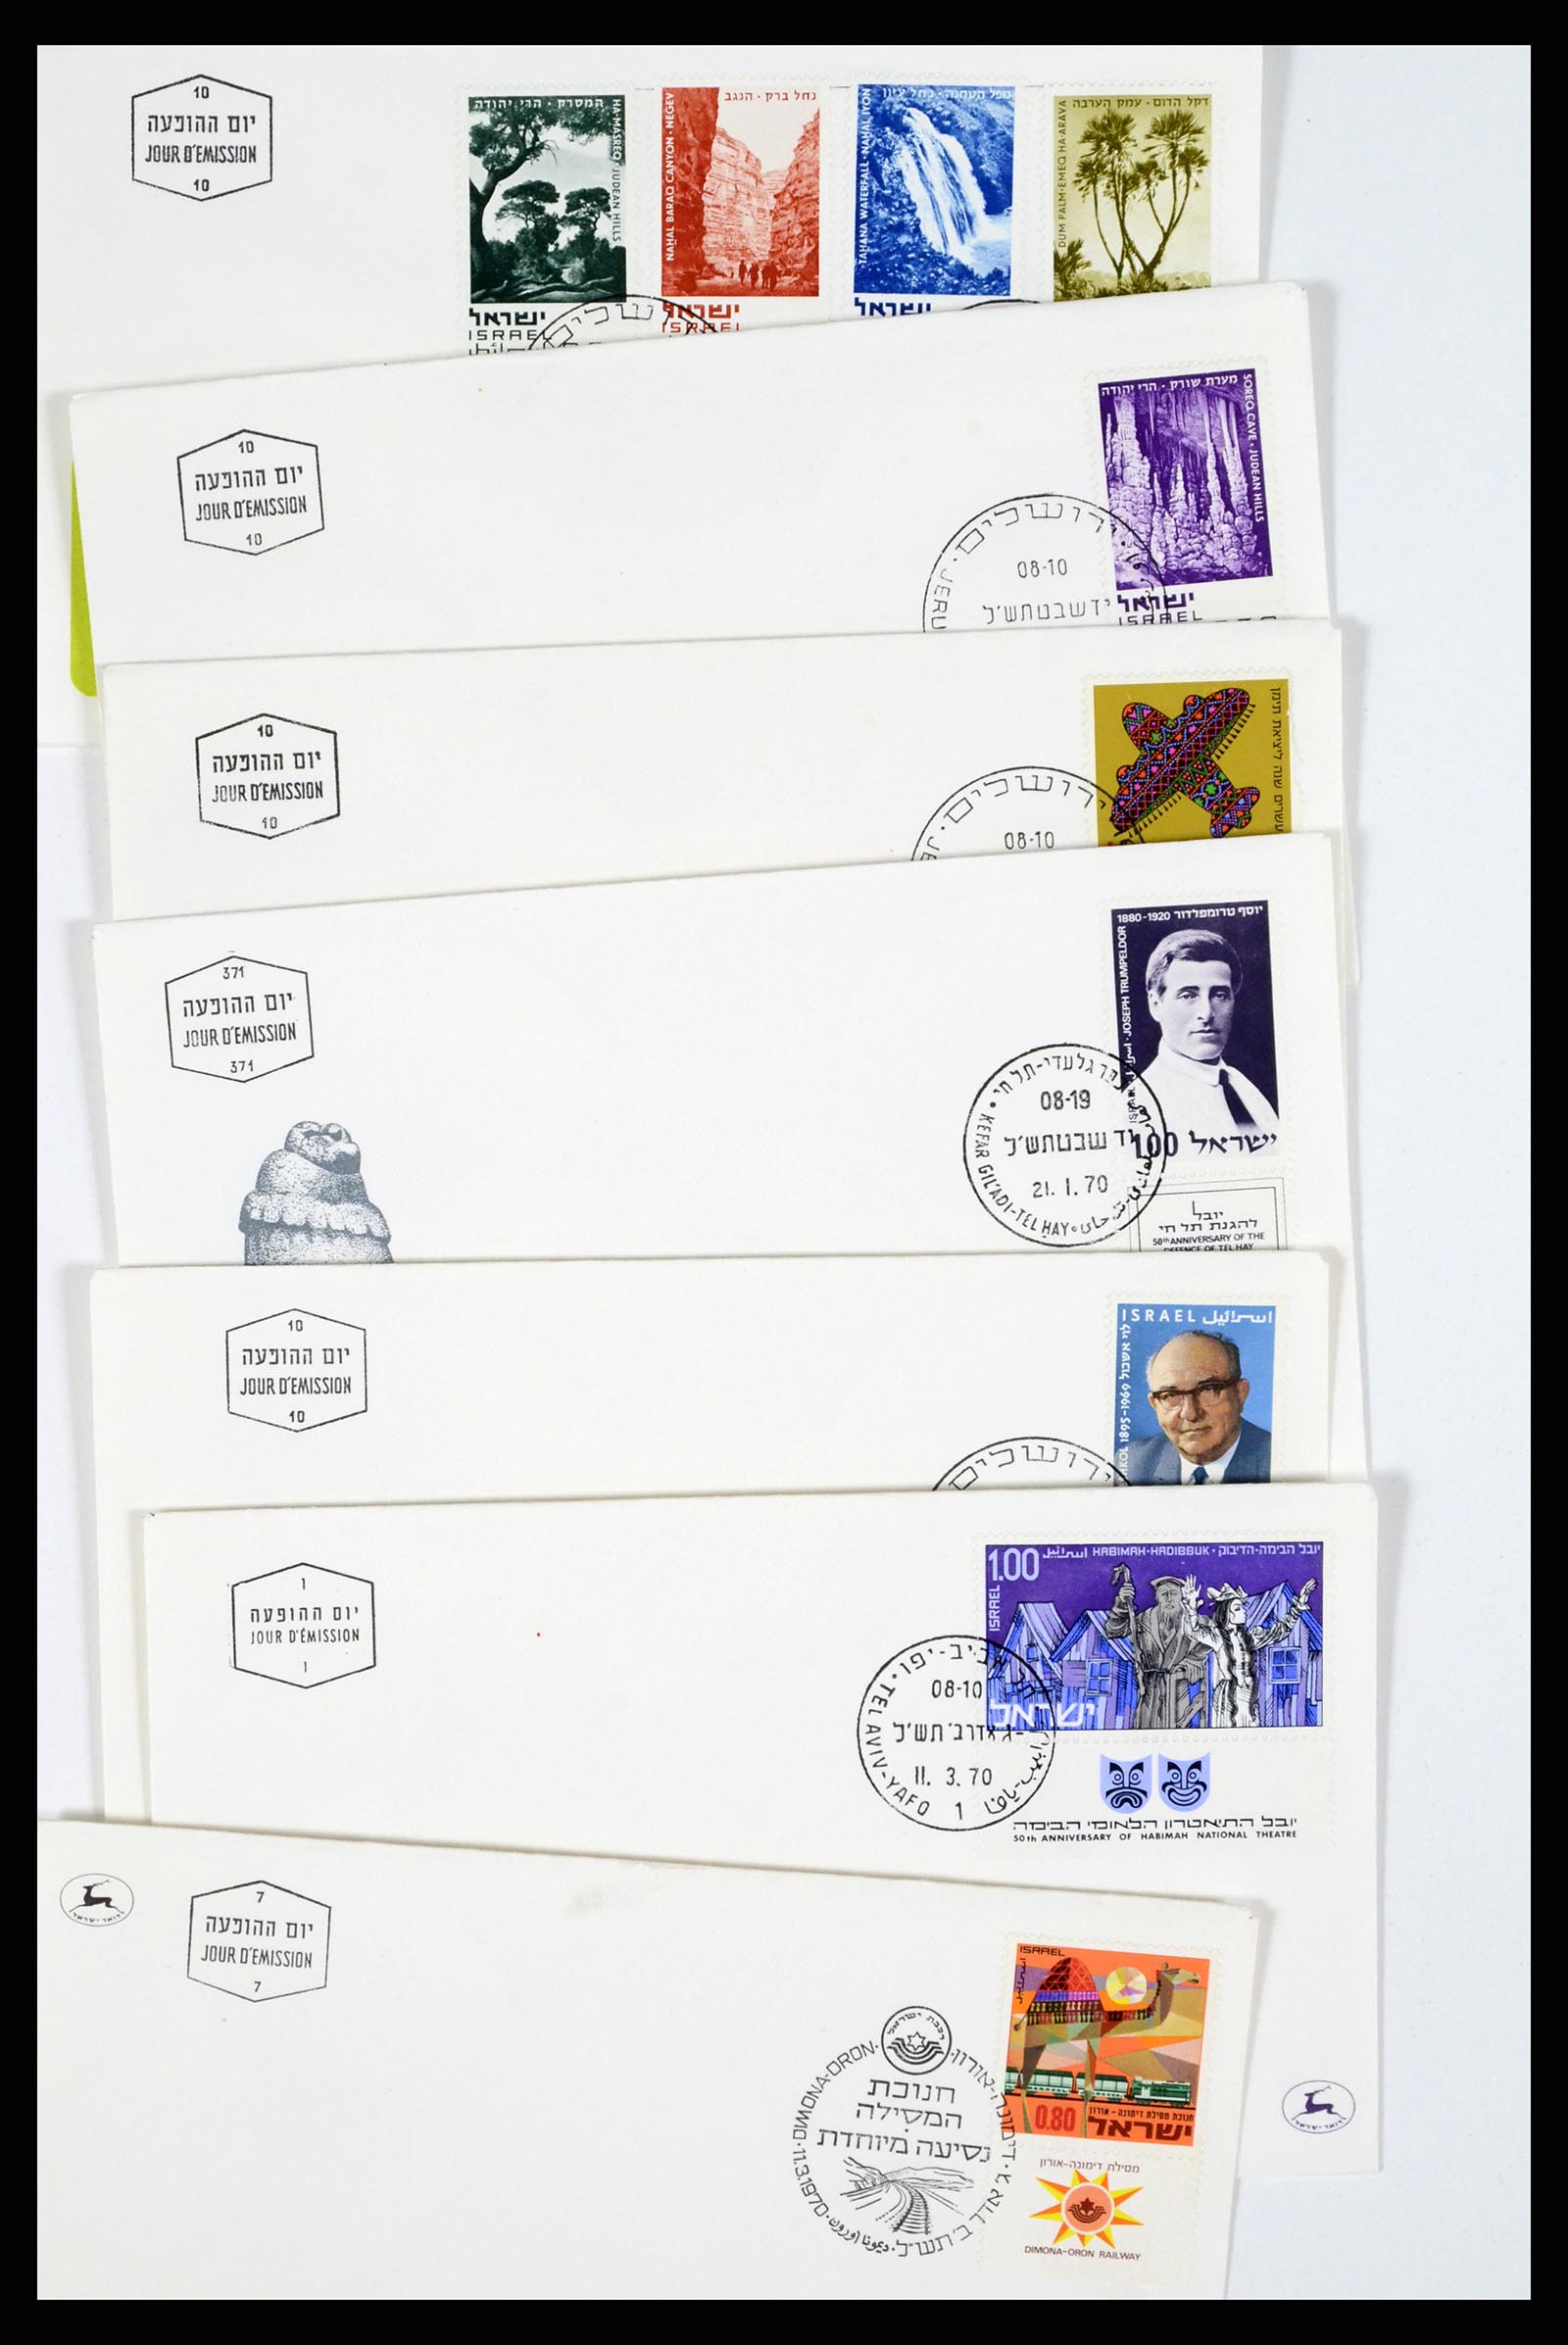 37711 010 - Stamp collection 37711 Israel first day covers 1970-2000.